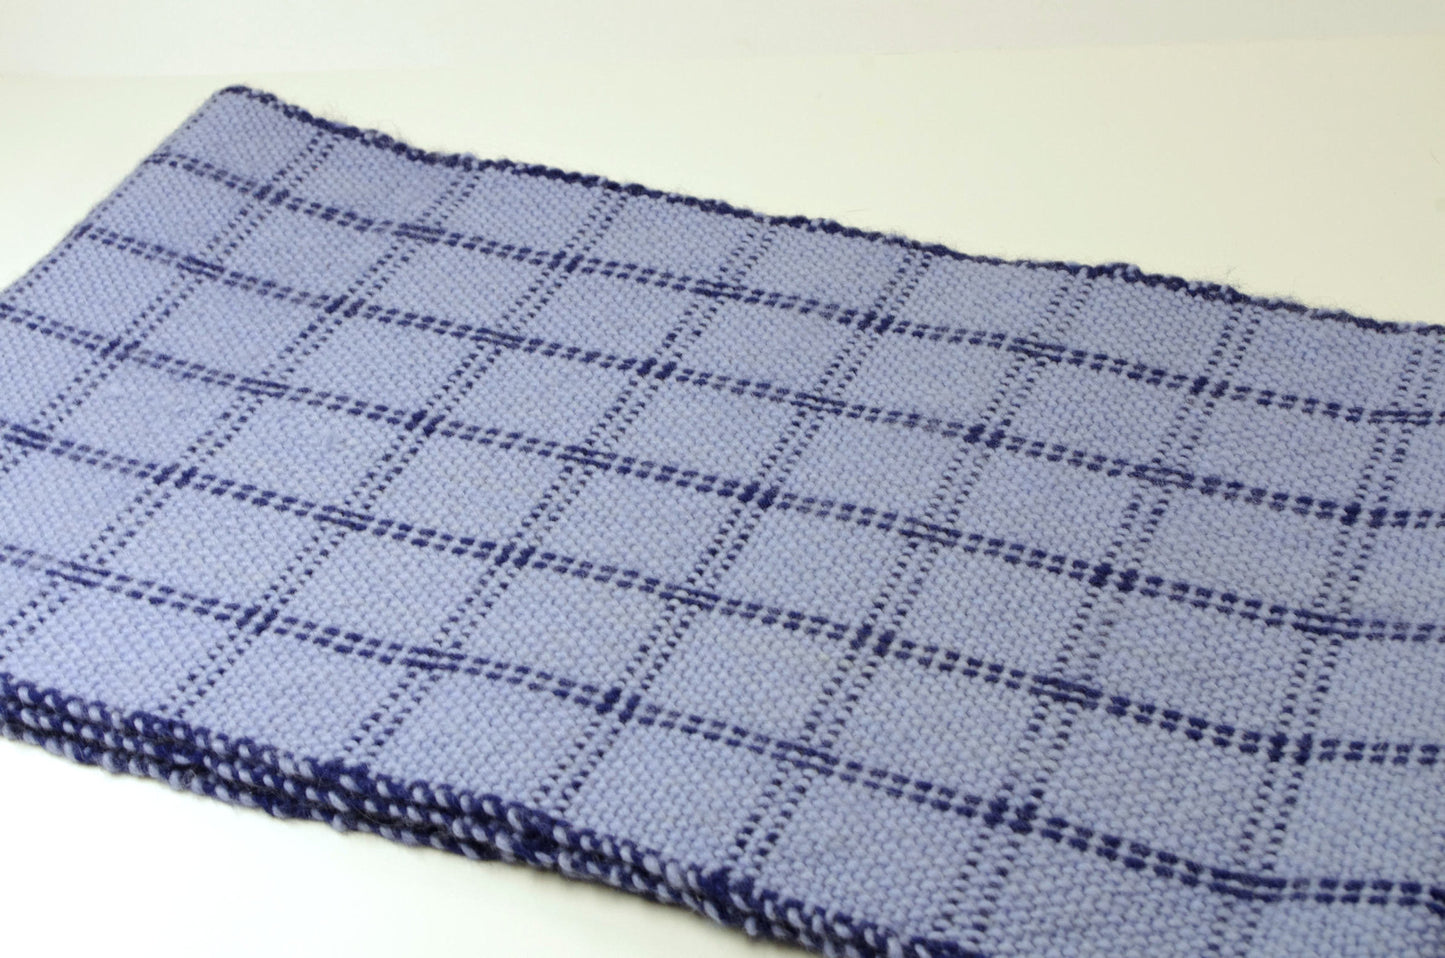 Handwoven Blue Wool Scarf Large Bulky Warm